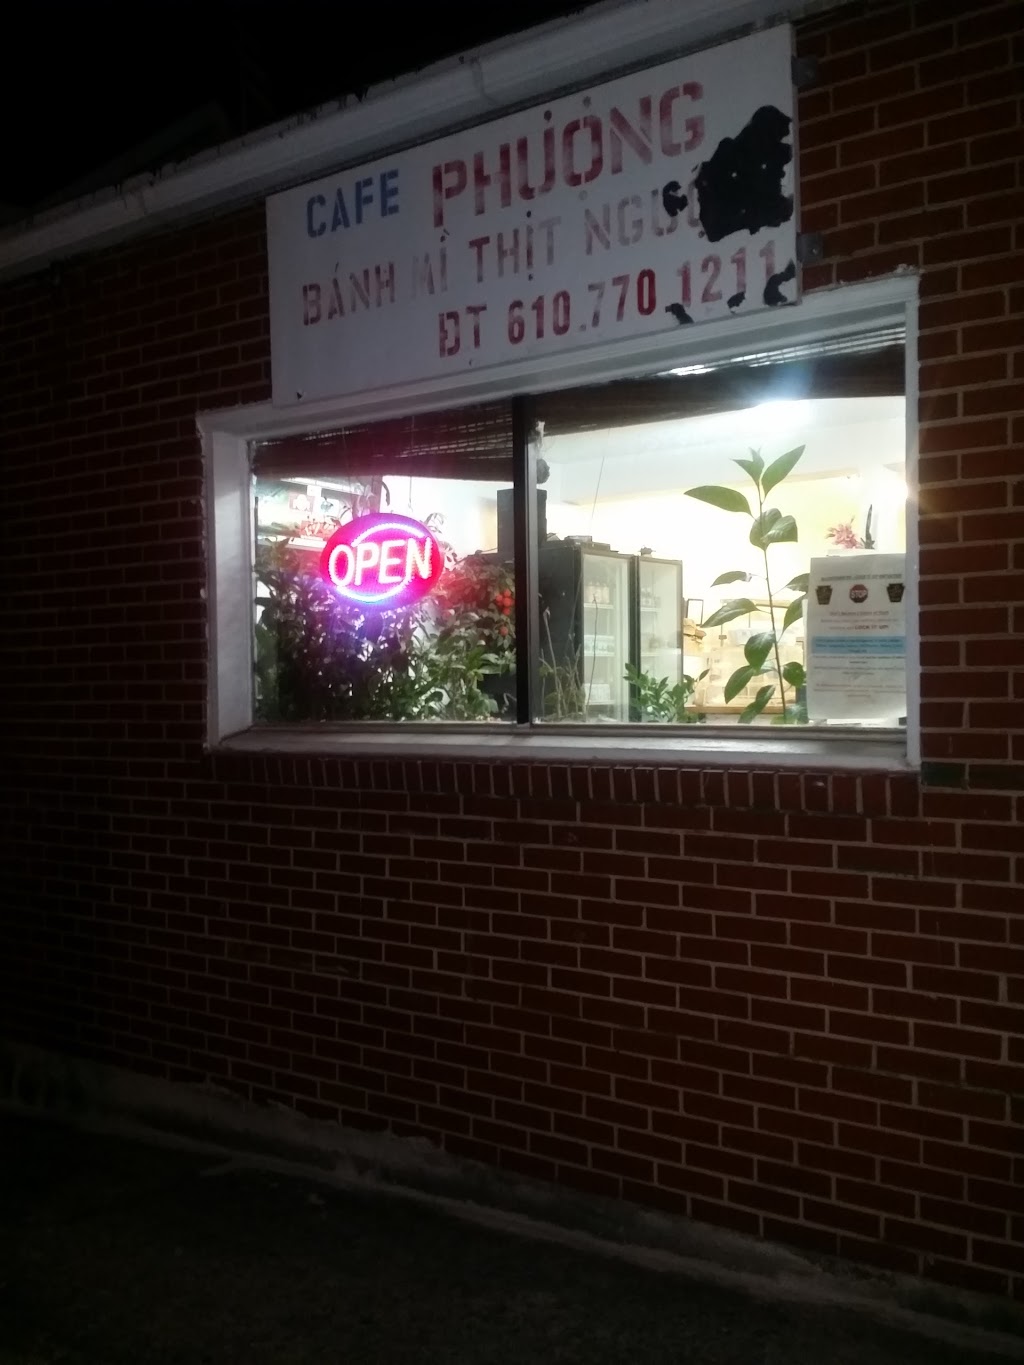 Cafe Phuong | 725 N 4th St, Allentown, PA 18102 | Phone: (610) 770-1211